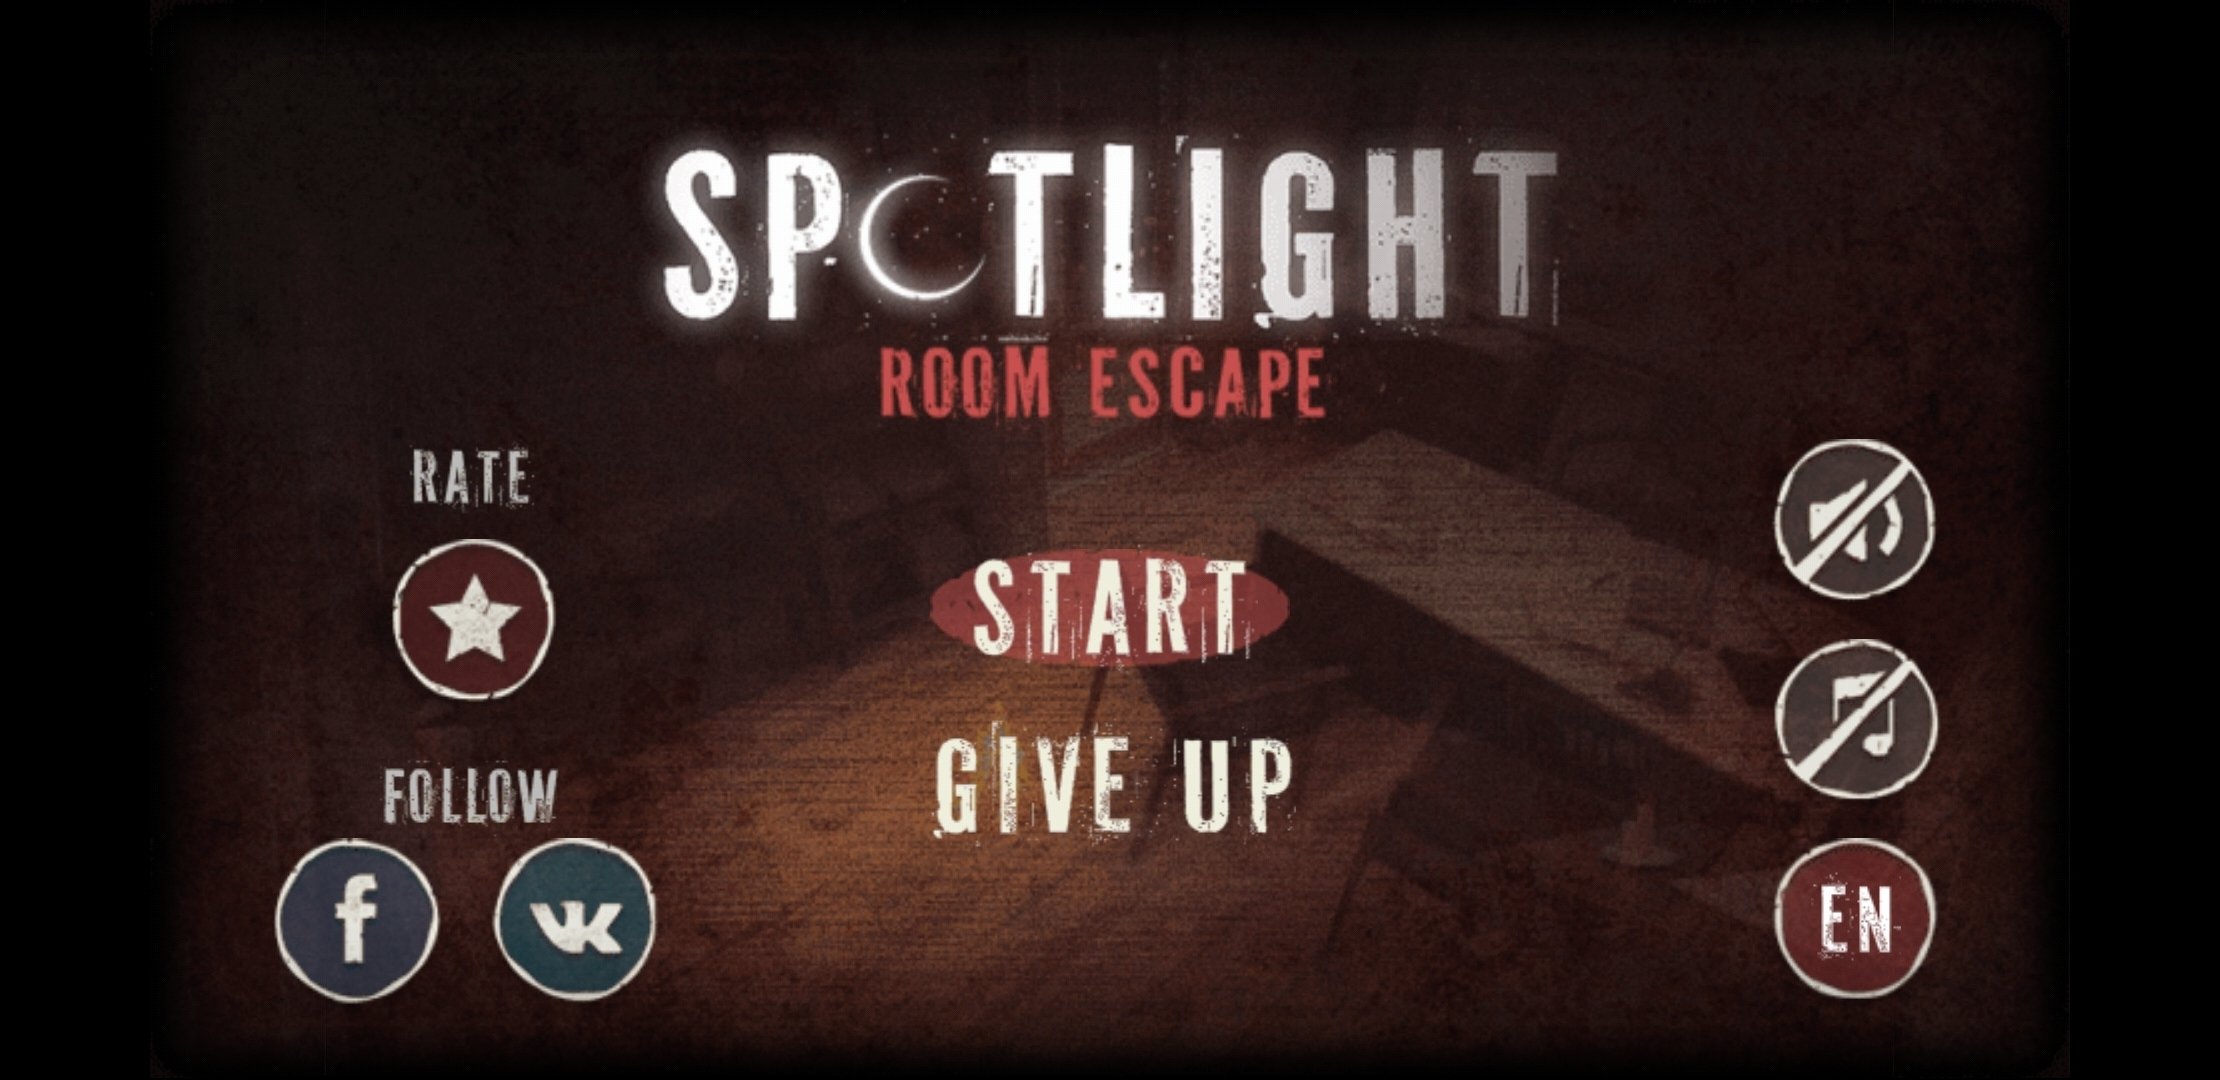 One Room Escape APK (Android Game) - Free Download